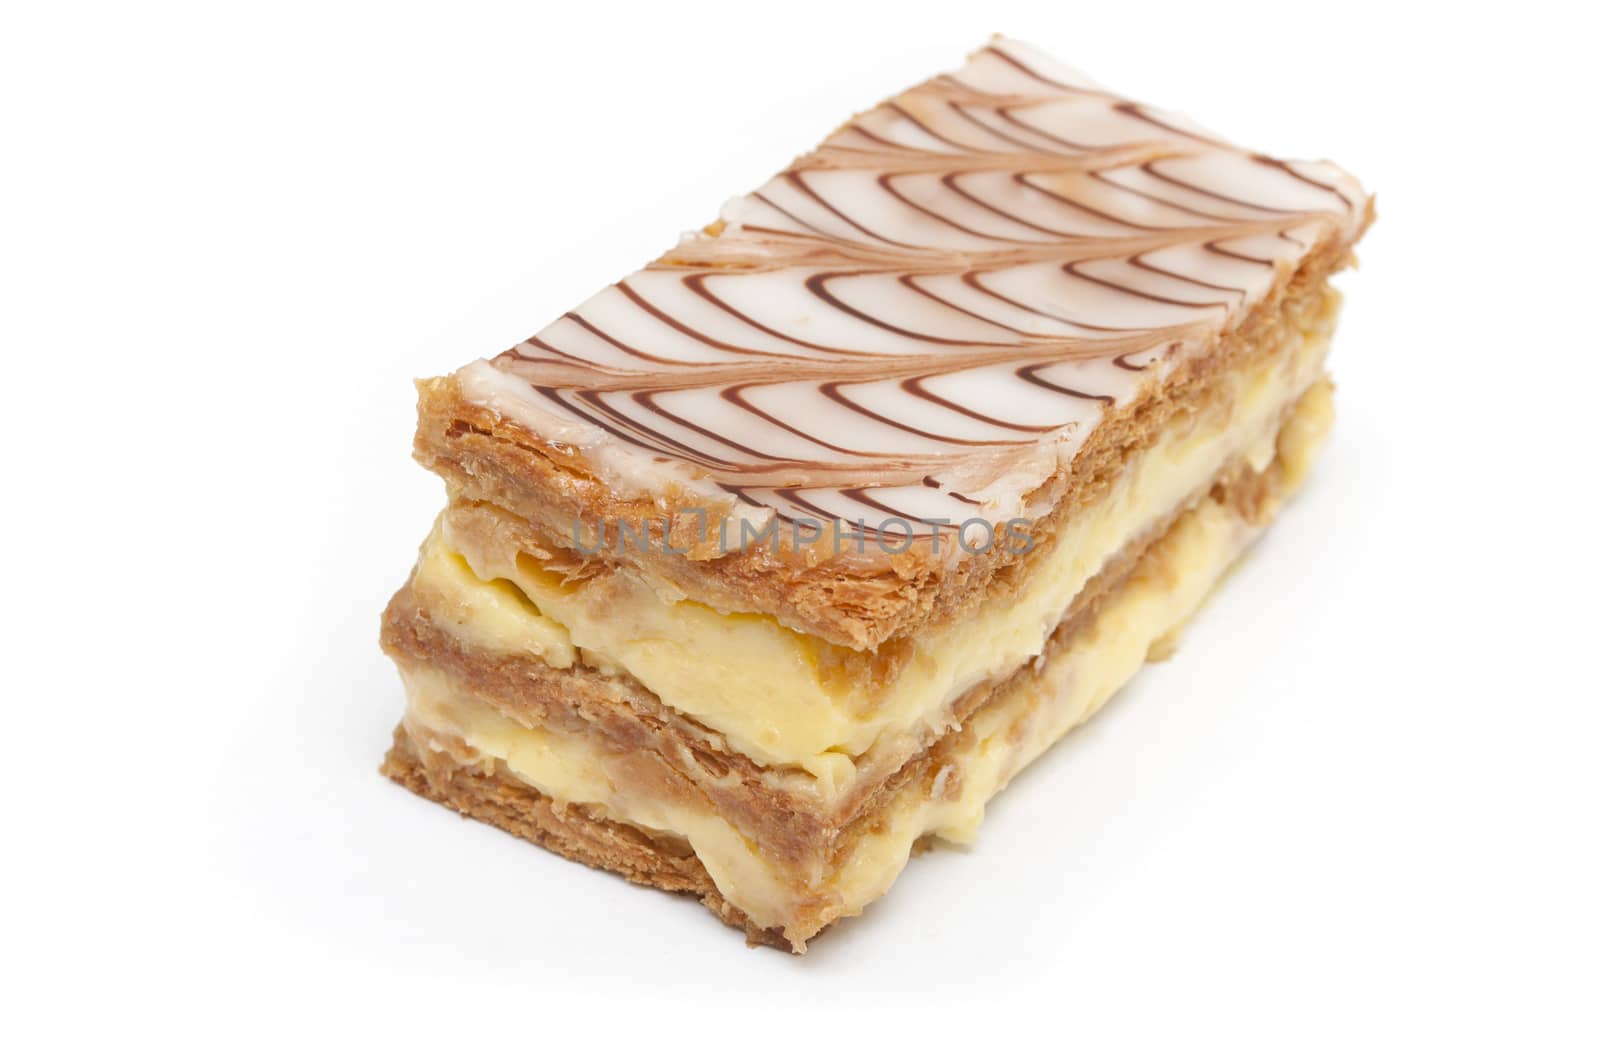 french mille-feuille cake closeup on white background by NeydtStock